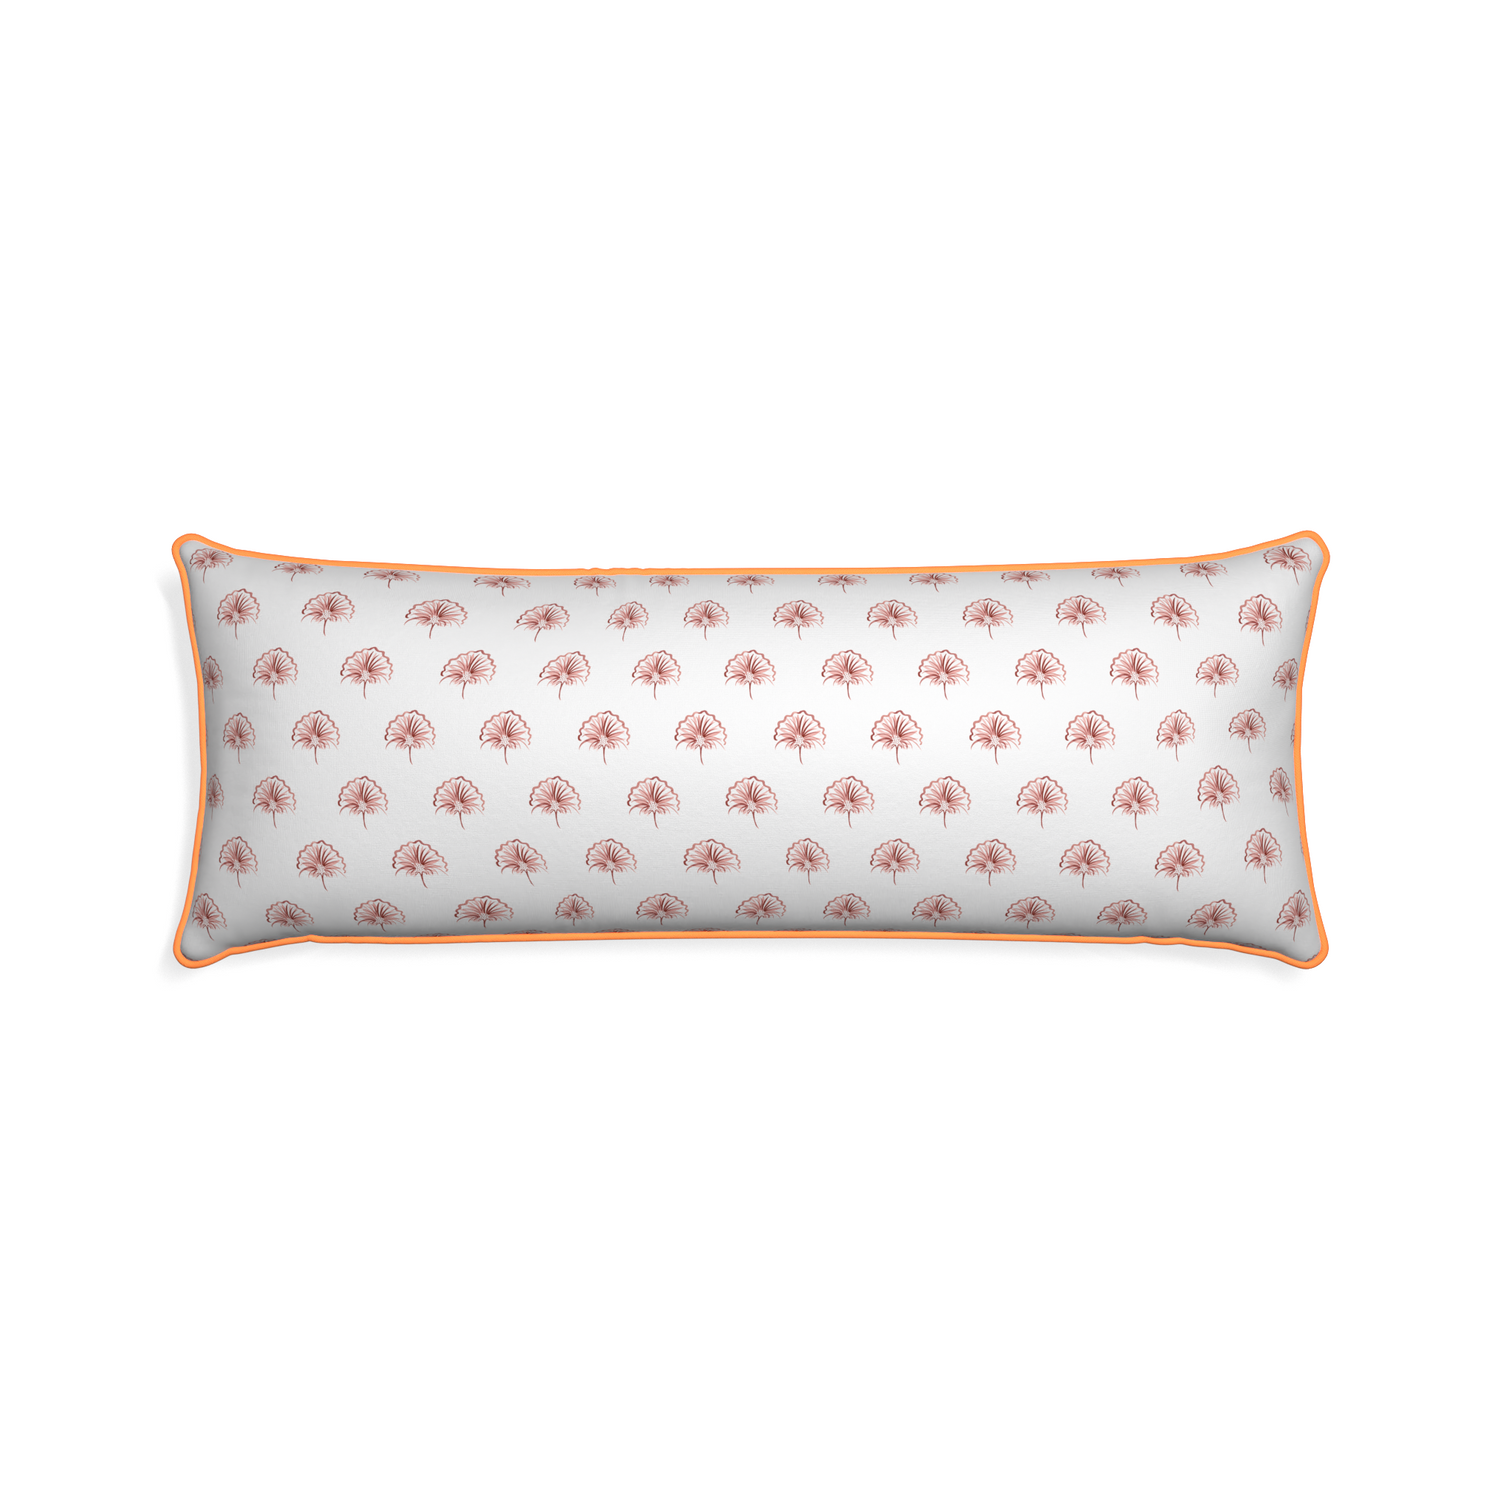 Xl-lumbar penelope rose custom pillow with clementine piping on white background